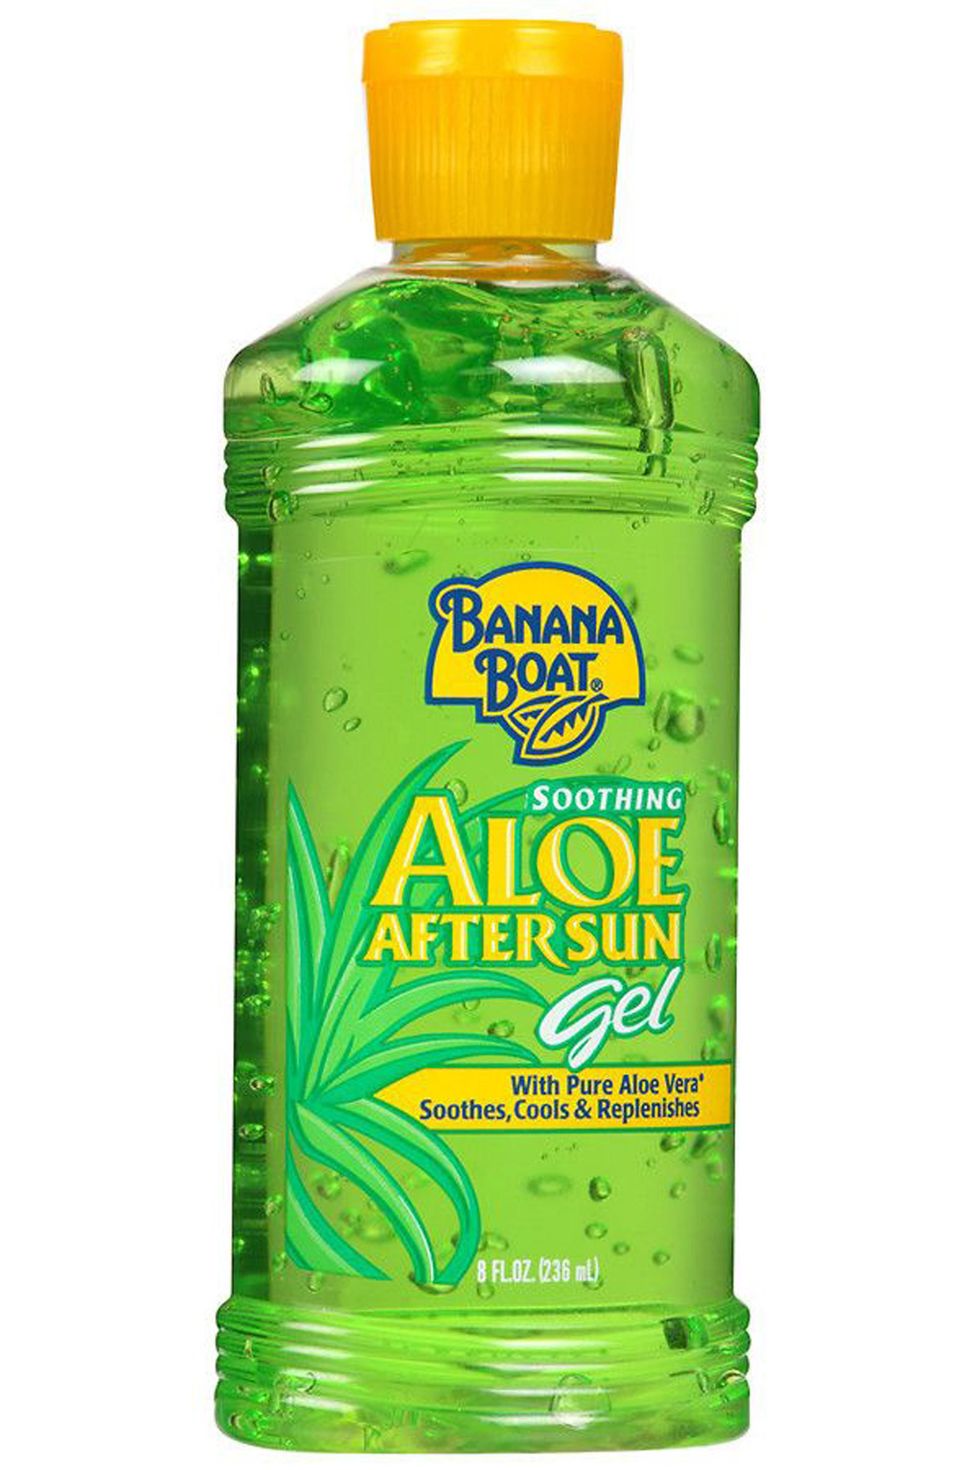 7 Best Aloe Vera Gels for Treating Sunburns and Pain – Skincare Products